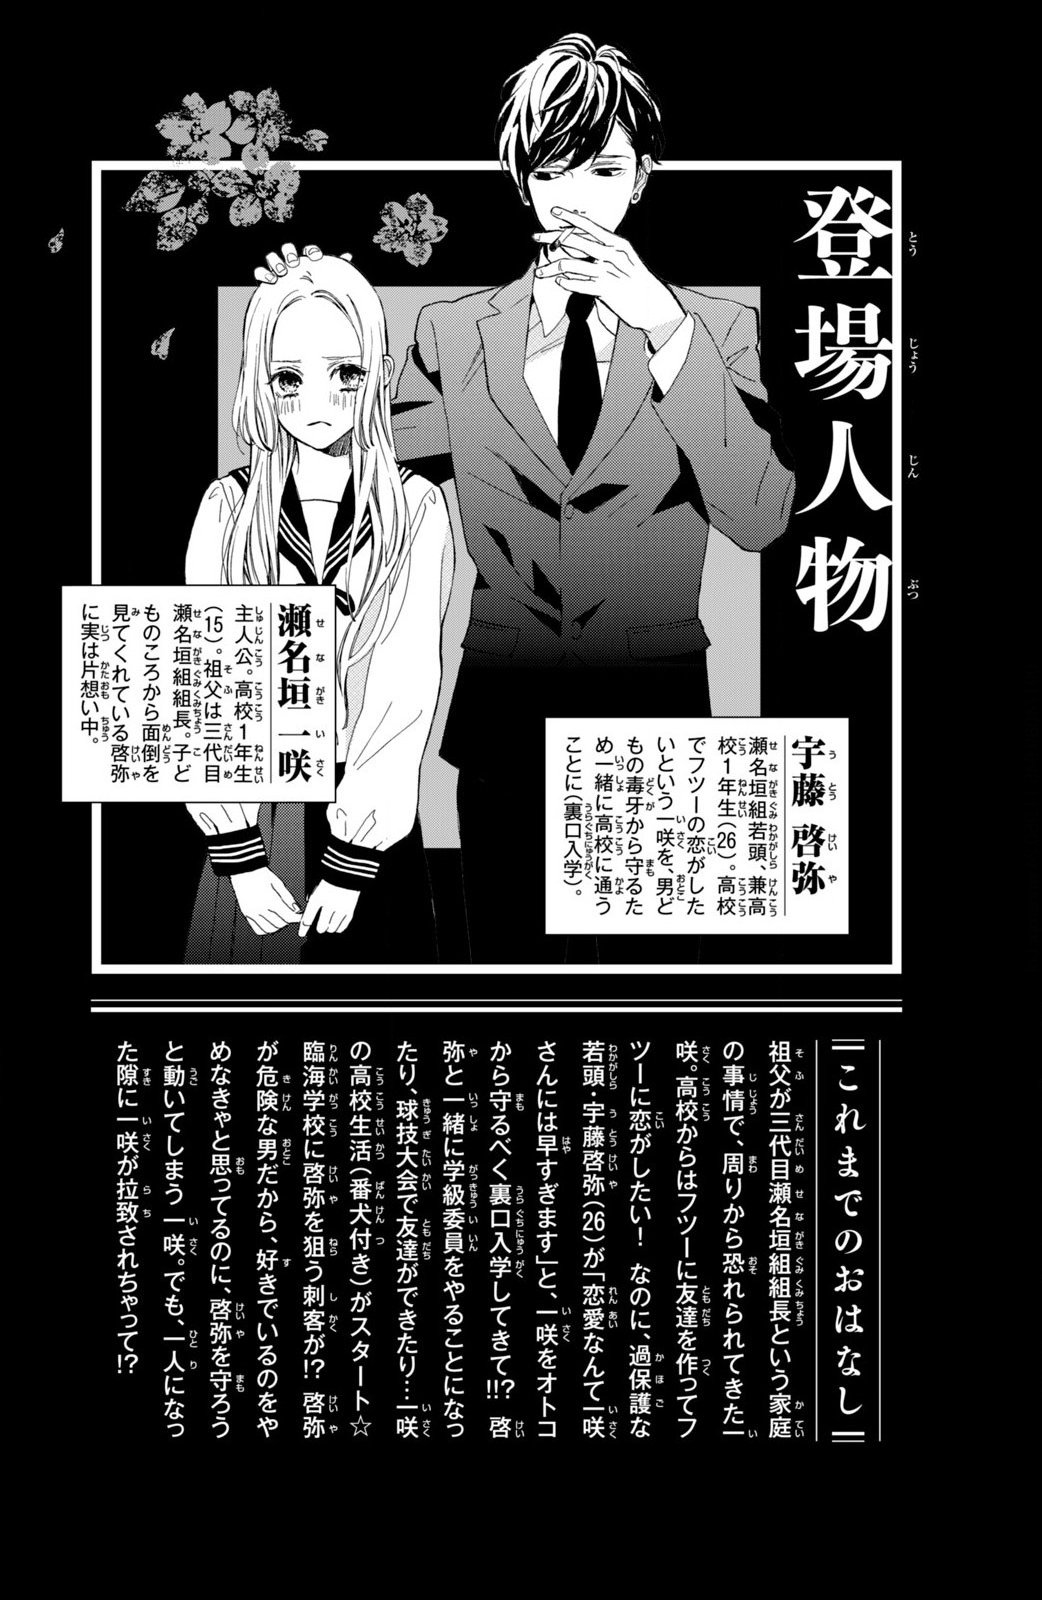 Ojou to Banken kun Vol. 3 Ch. 9 Problems and Solutions (Part 1)